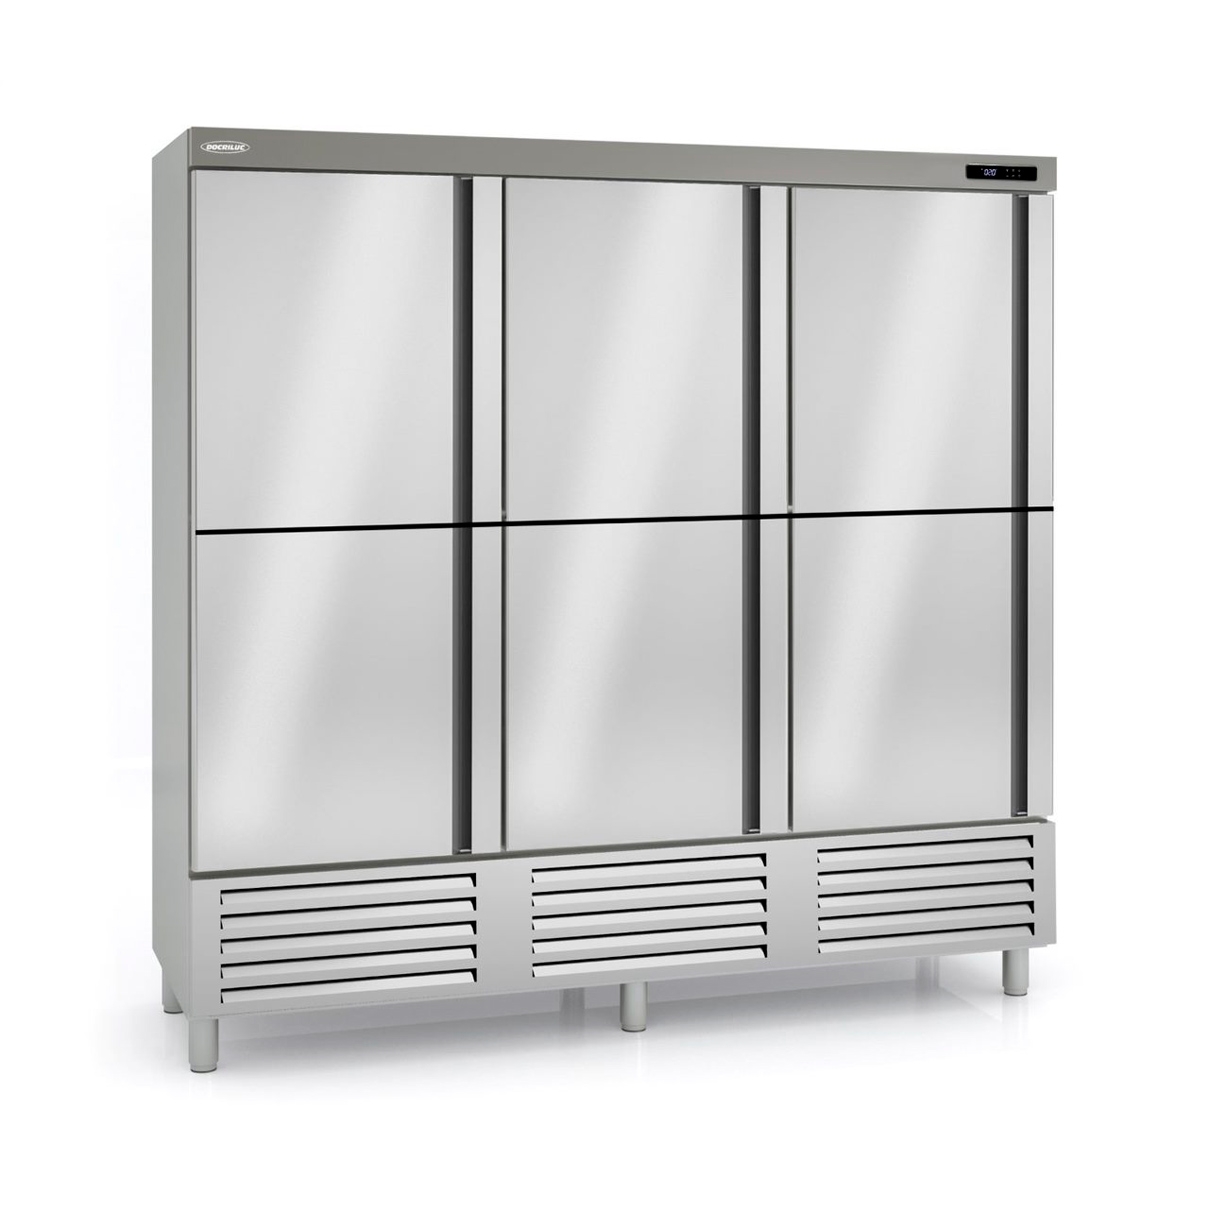 Snack Refrigerated Cabinet ARS-210-6